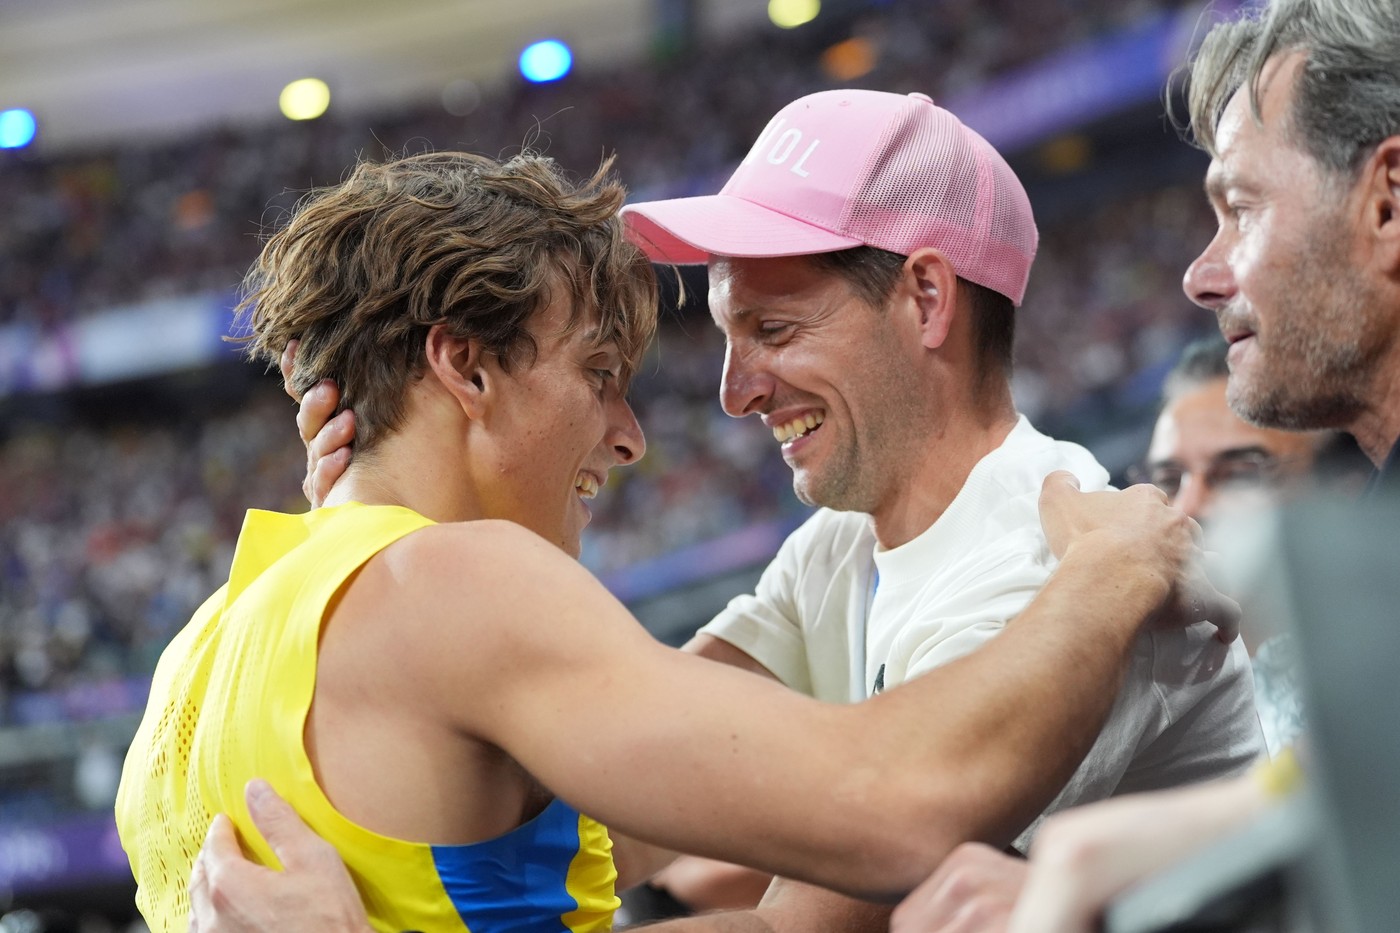 Armand Duplantis of Sweden celebrates with former Olympic champion and World Record holder Renaud Lavillenie of France after winning gold and setting a new World Record in the Men's Pole Vault
Paris 2024 Olympic Games, Day Ten, Paris, France - 05 Aug 2024,Image: 896314550, License: Rights-managed, Restrictions: , Model Release: no